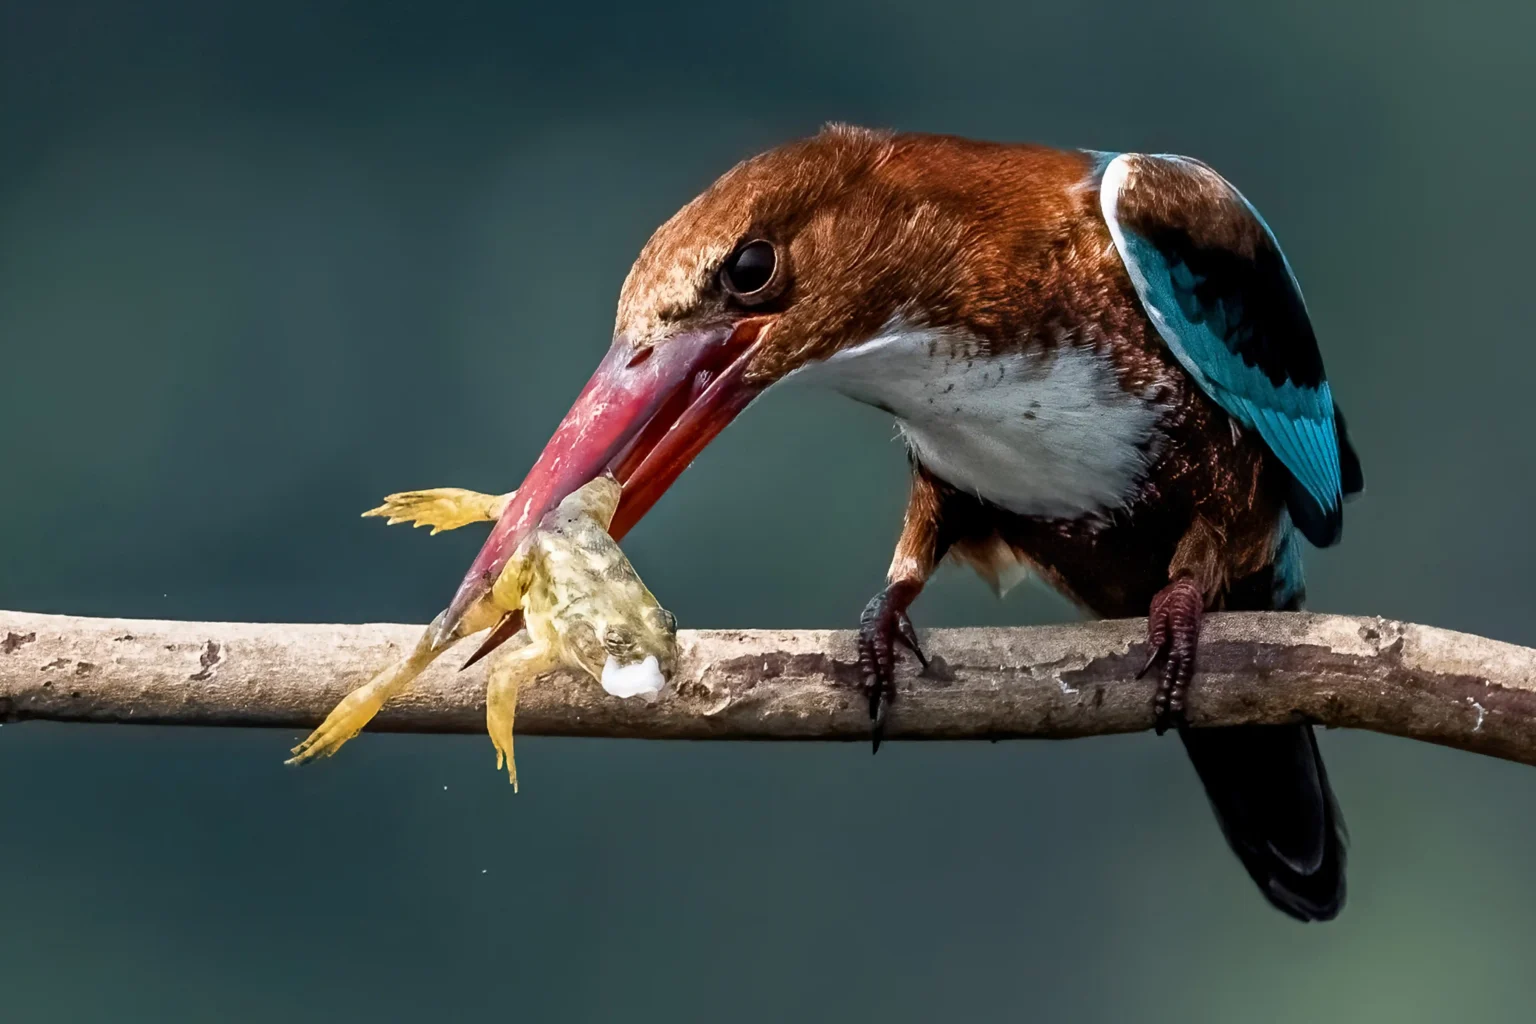 The speedy White-Throated Kingfisher devouring frog in West Bengal, India.